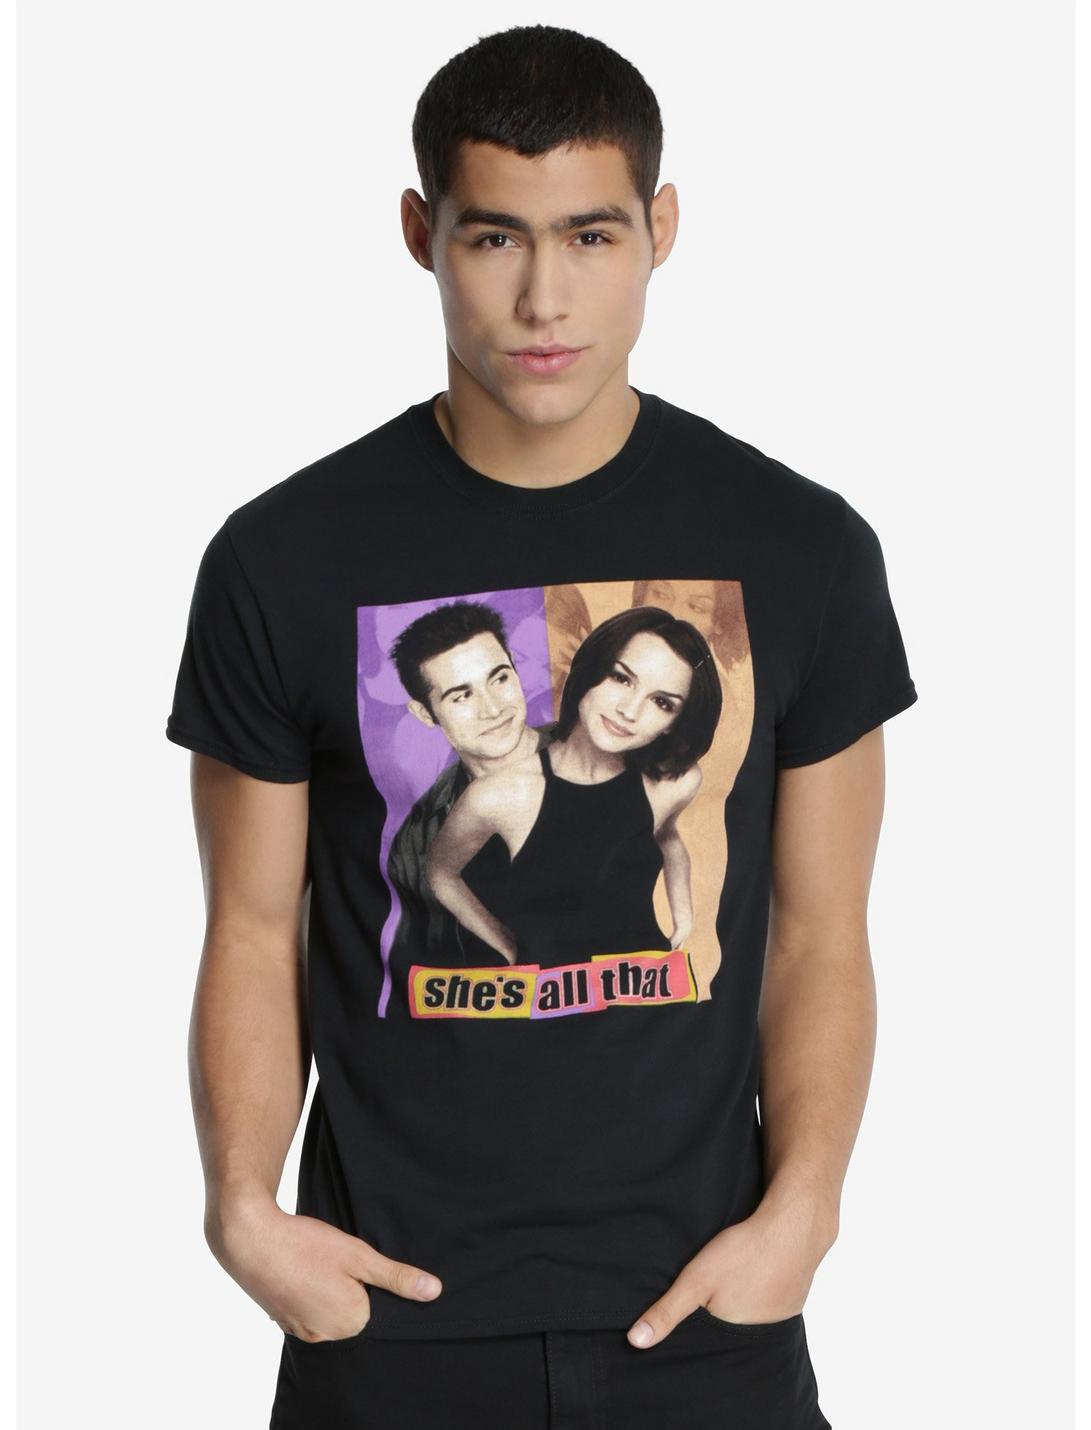 She's All That Poster T-Shirt, BLACK, hi-res